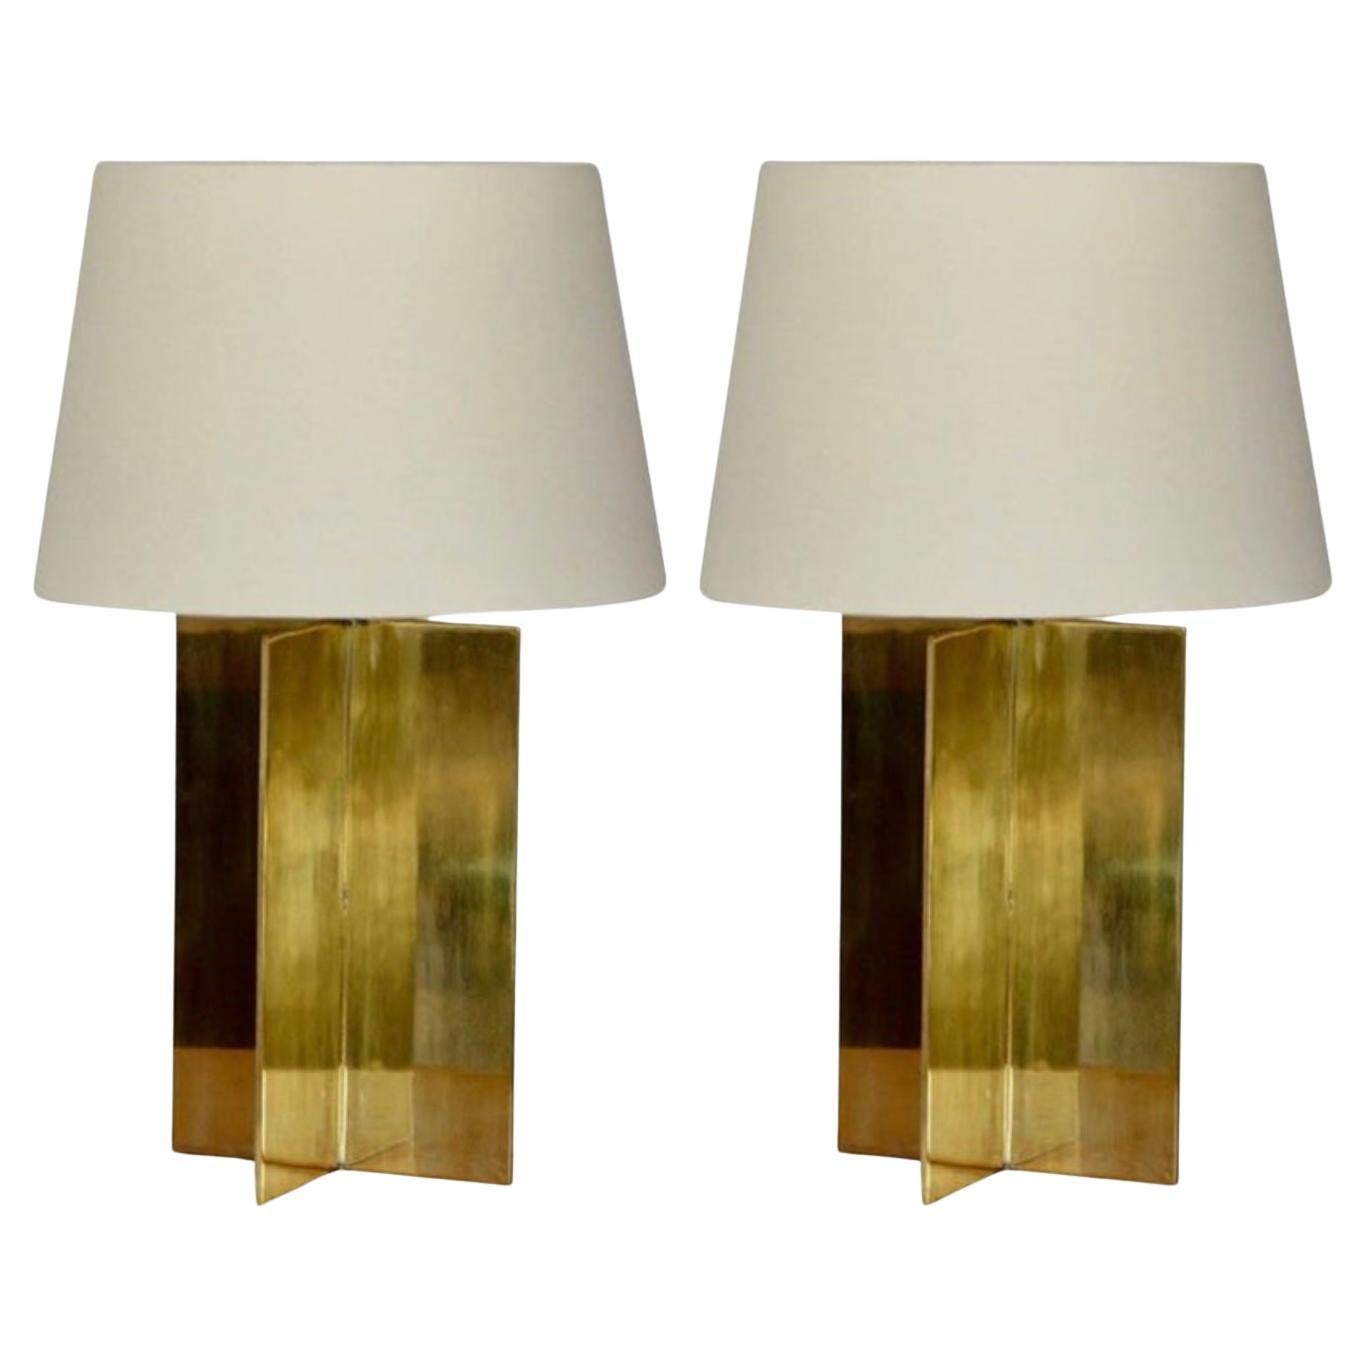 Pair of 'Croisillon' Solid Brass and Parchment Lamps by Design Frères For Sale